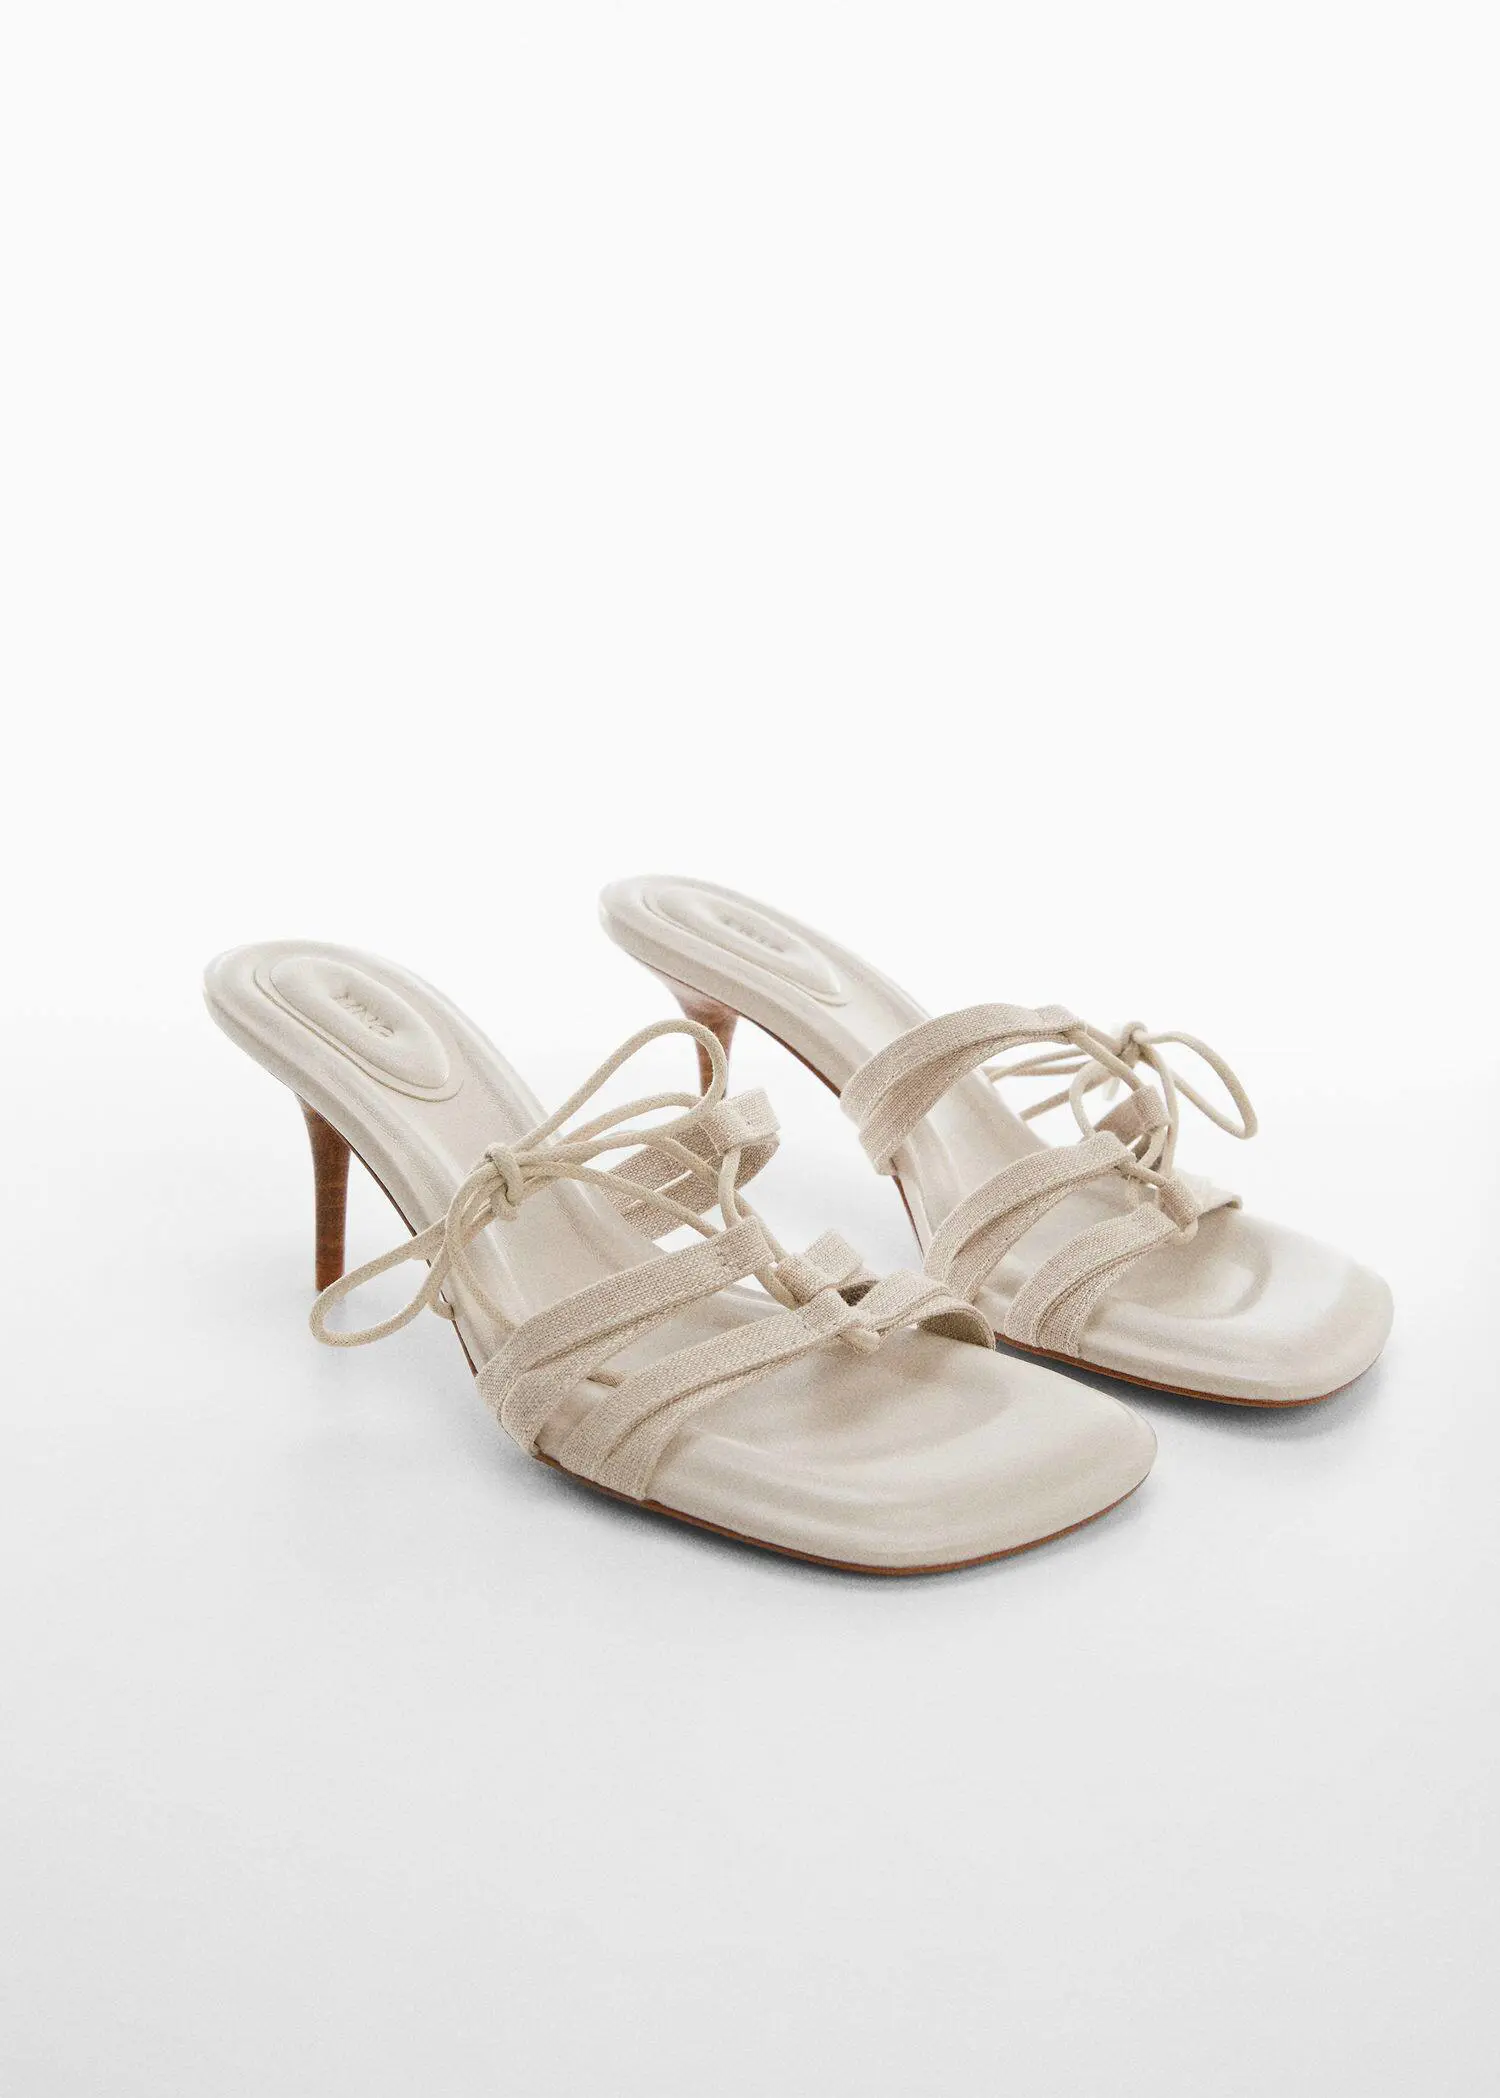 Mango Bow heel sandals. a pair of white high heeled sandals on a white surface. 